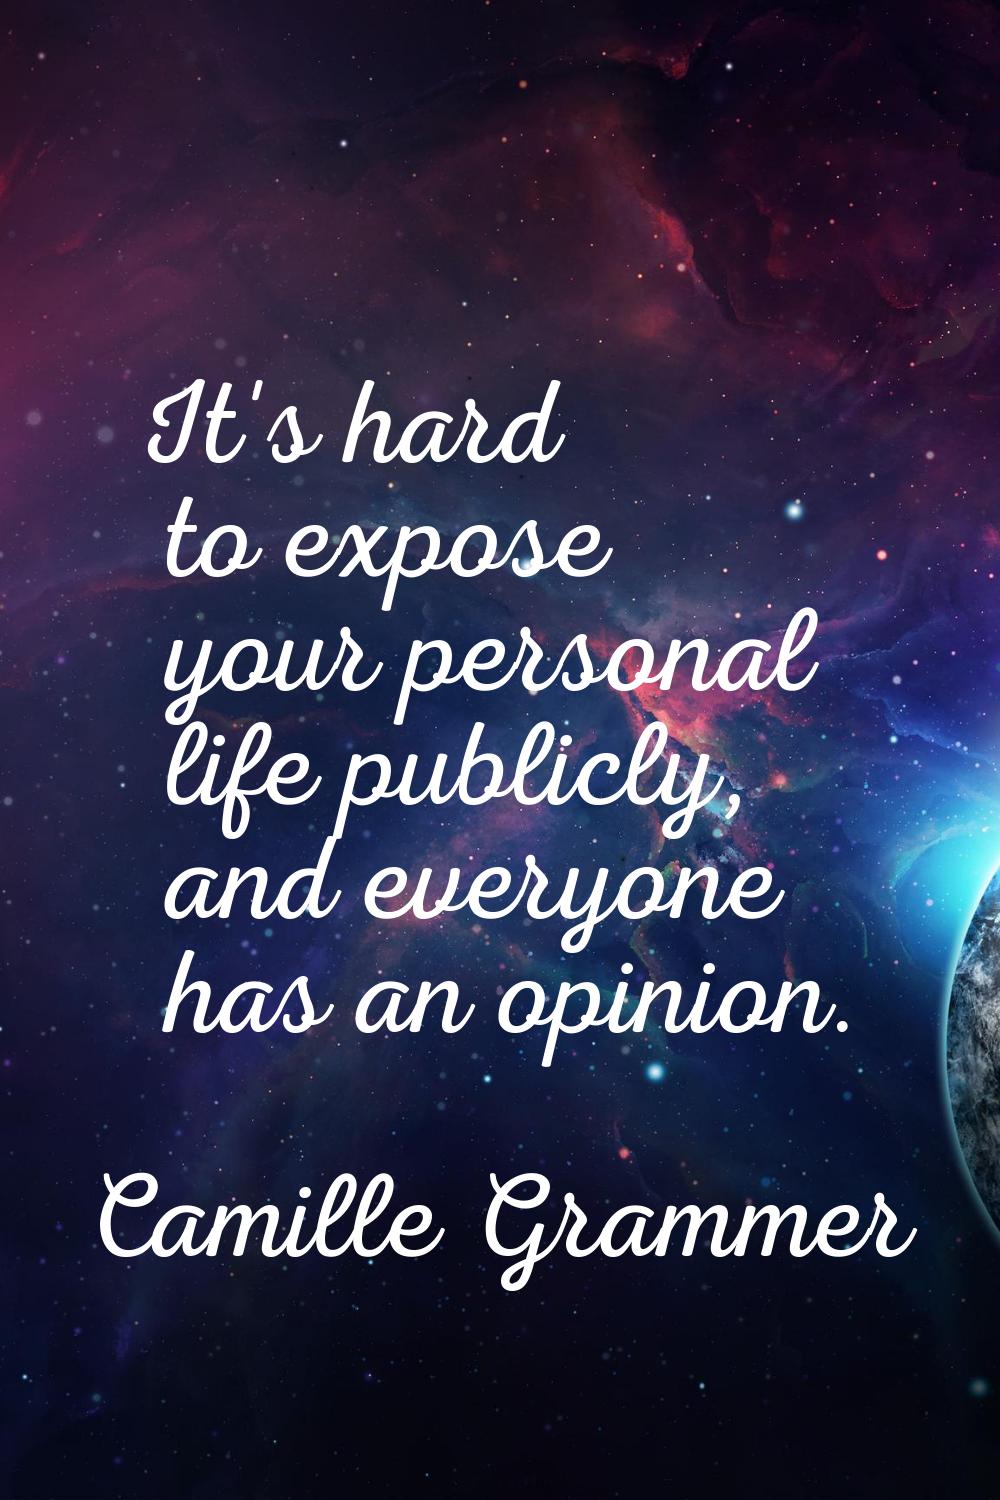 It's hard to expose your personal life publicly, and everyone has an opinion.